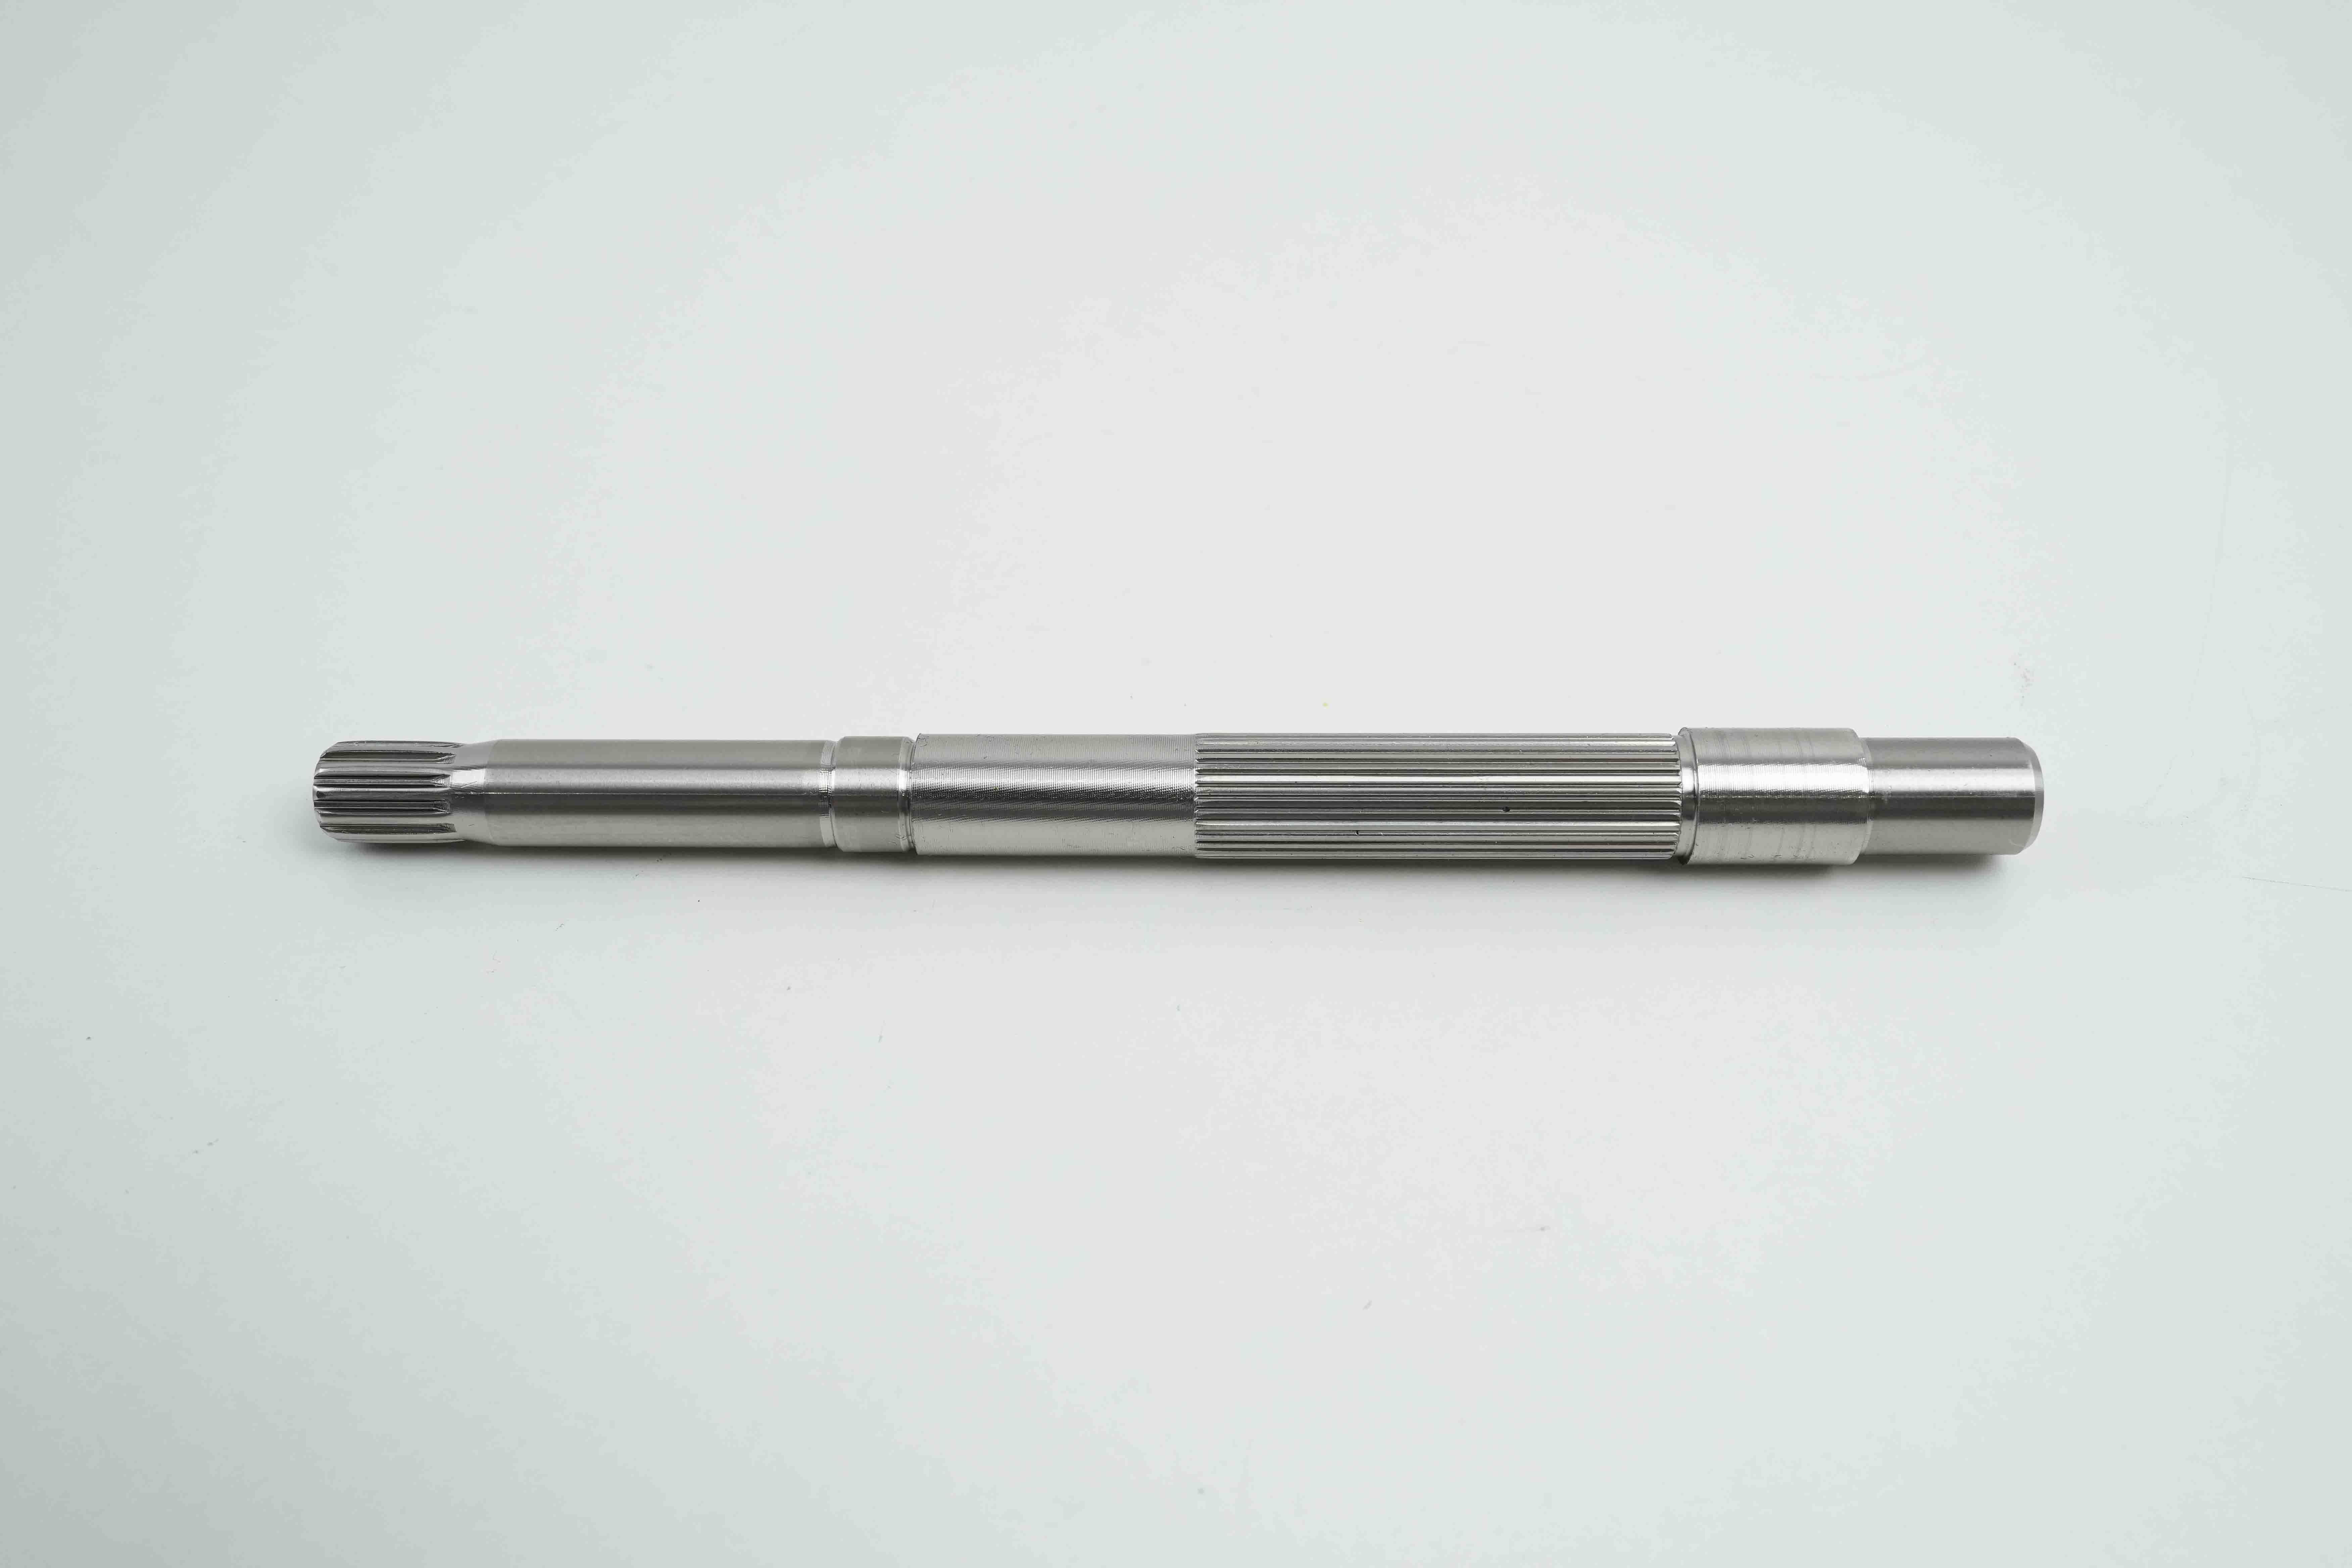 Machining of the Rotor Shaft: Precision and Expertise